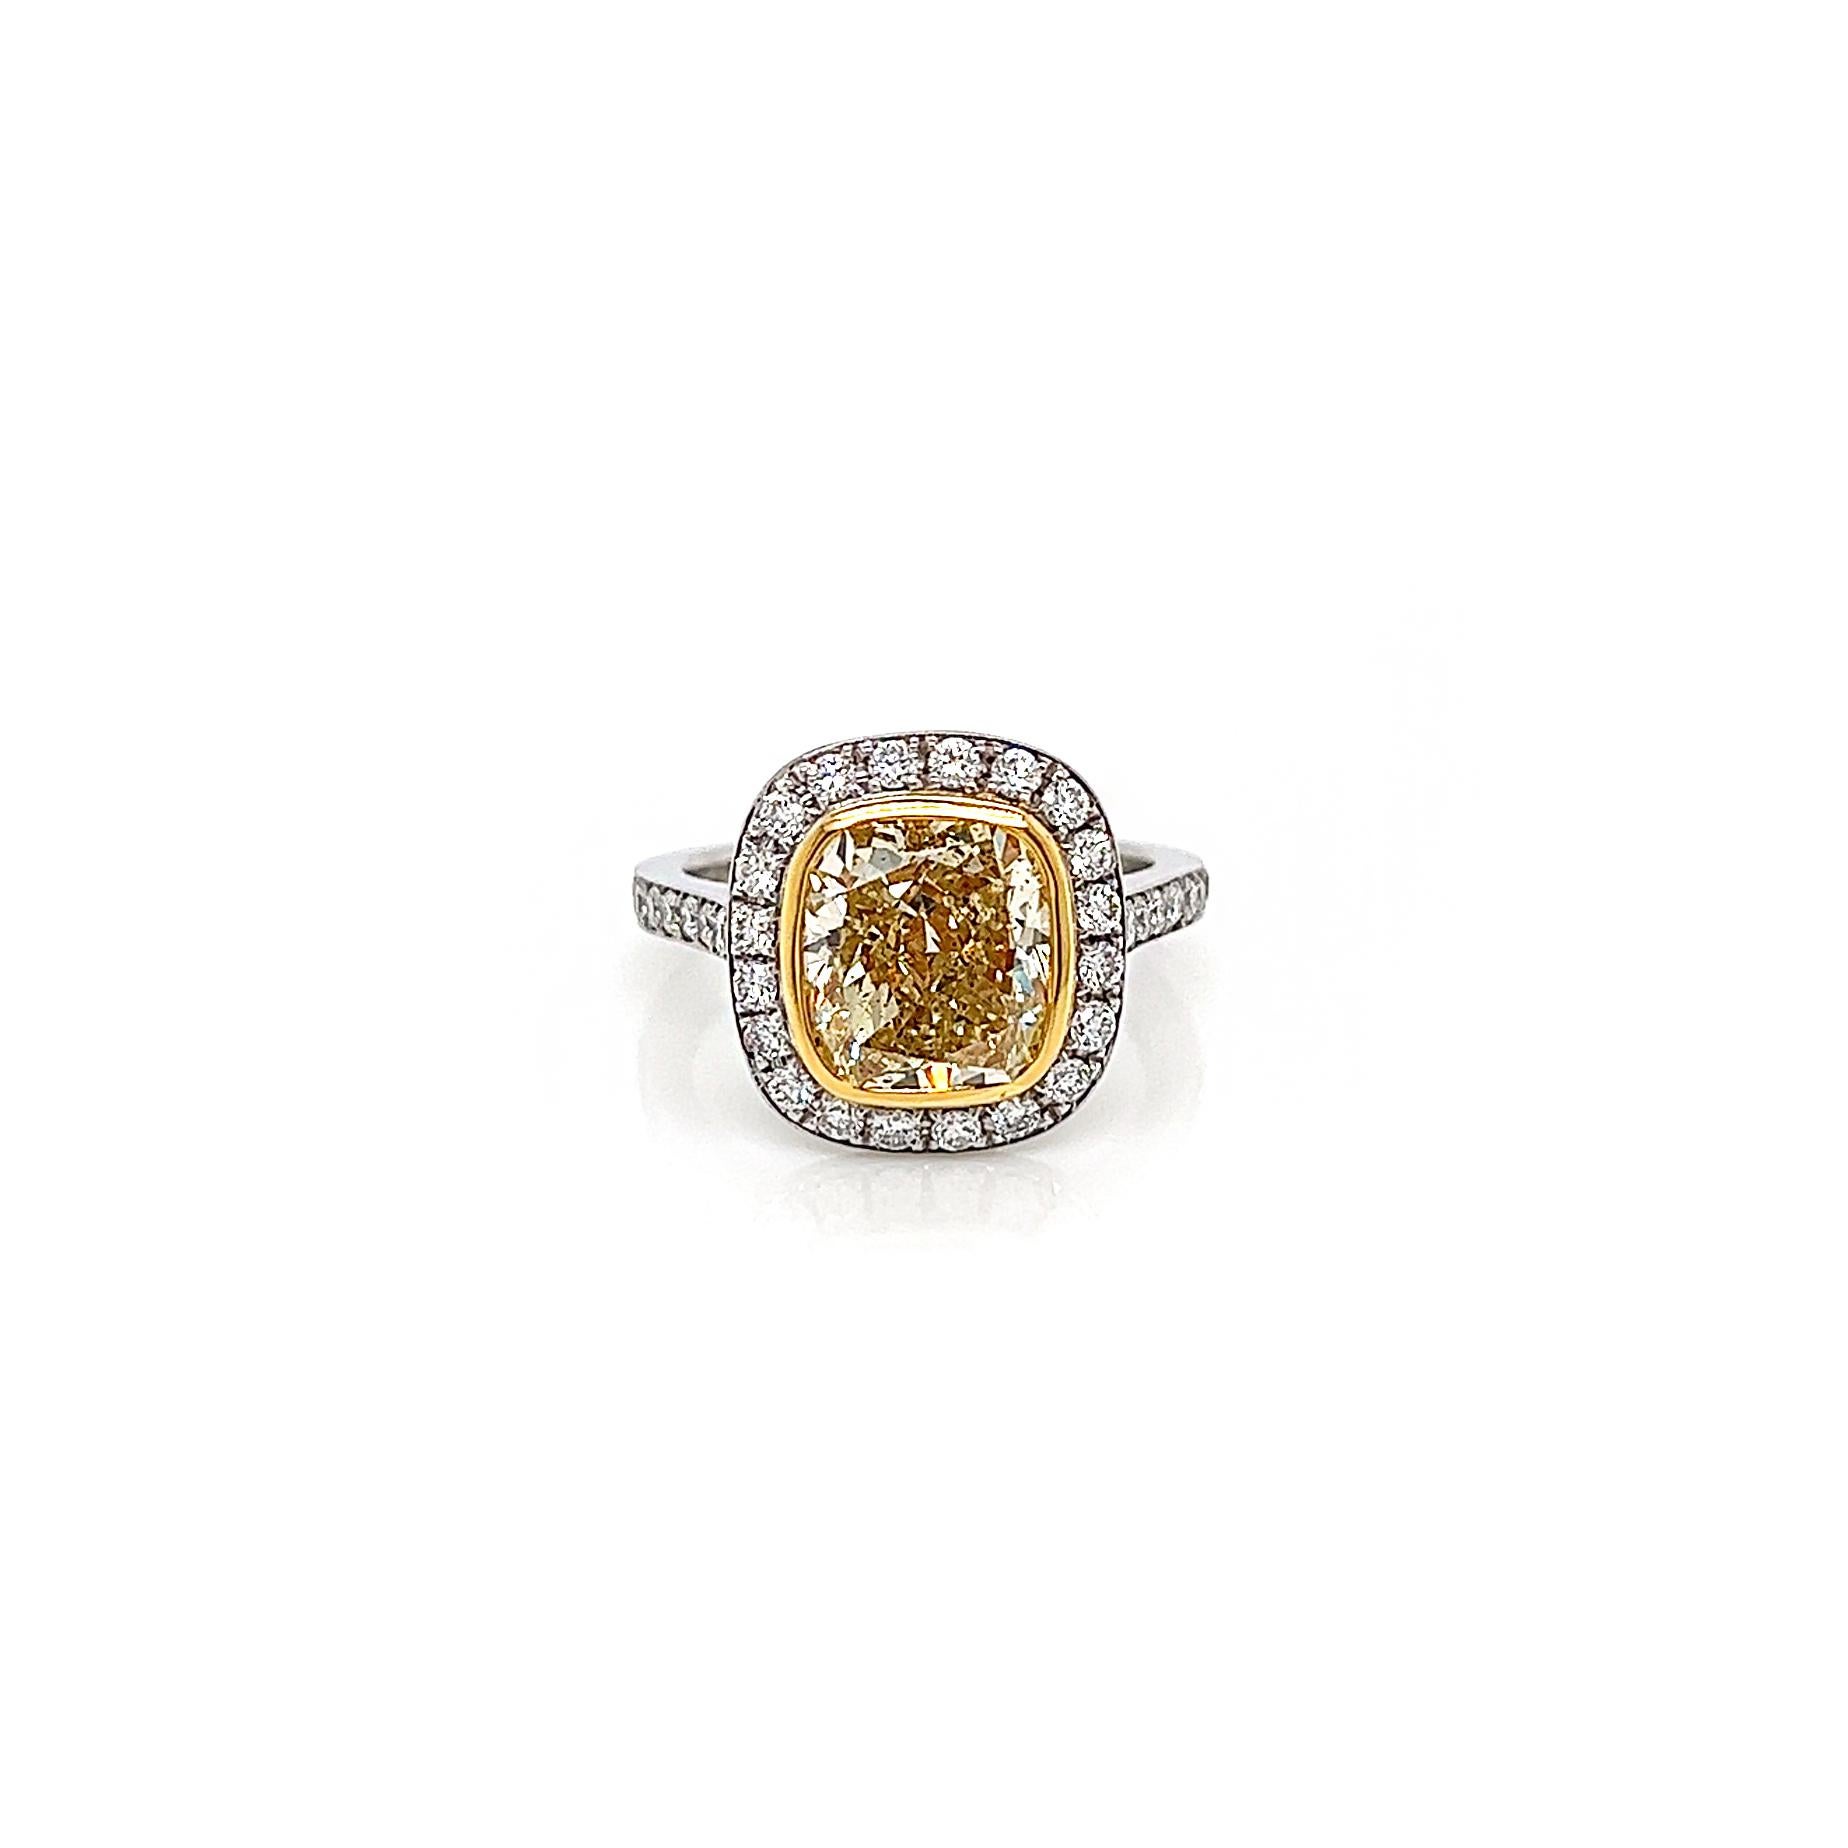 4.31 Total Carat Fancy Yellow Diamond Ladies Halo Pave-Set Engagement Ring. GIA Certified.

There's nothing better than enjoying the beauty of bright color diamonds in finely made jewelry, except maybe enjoying fancy yellow diamond ring wearing it